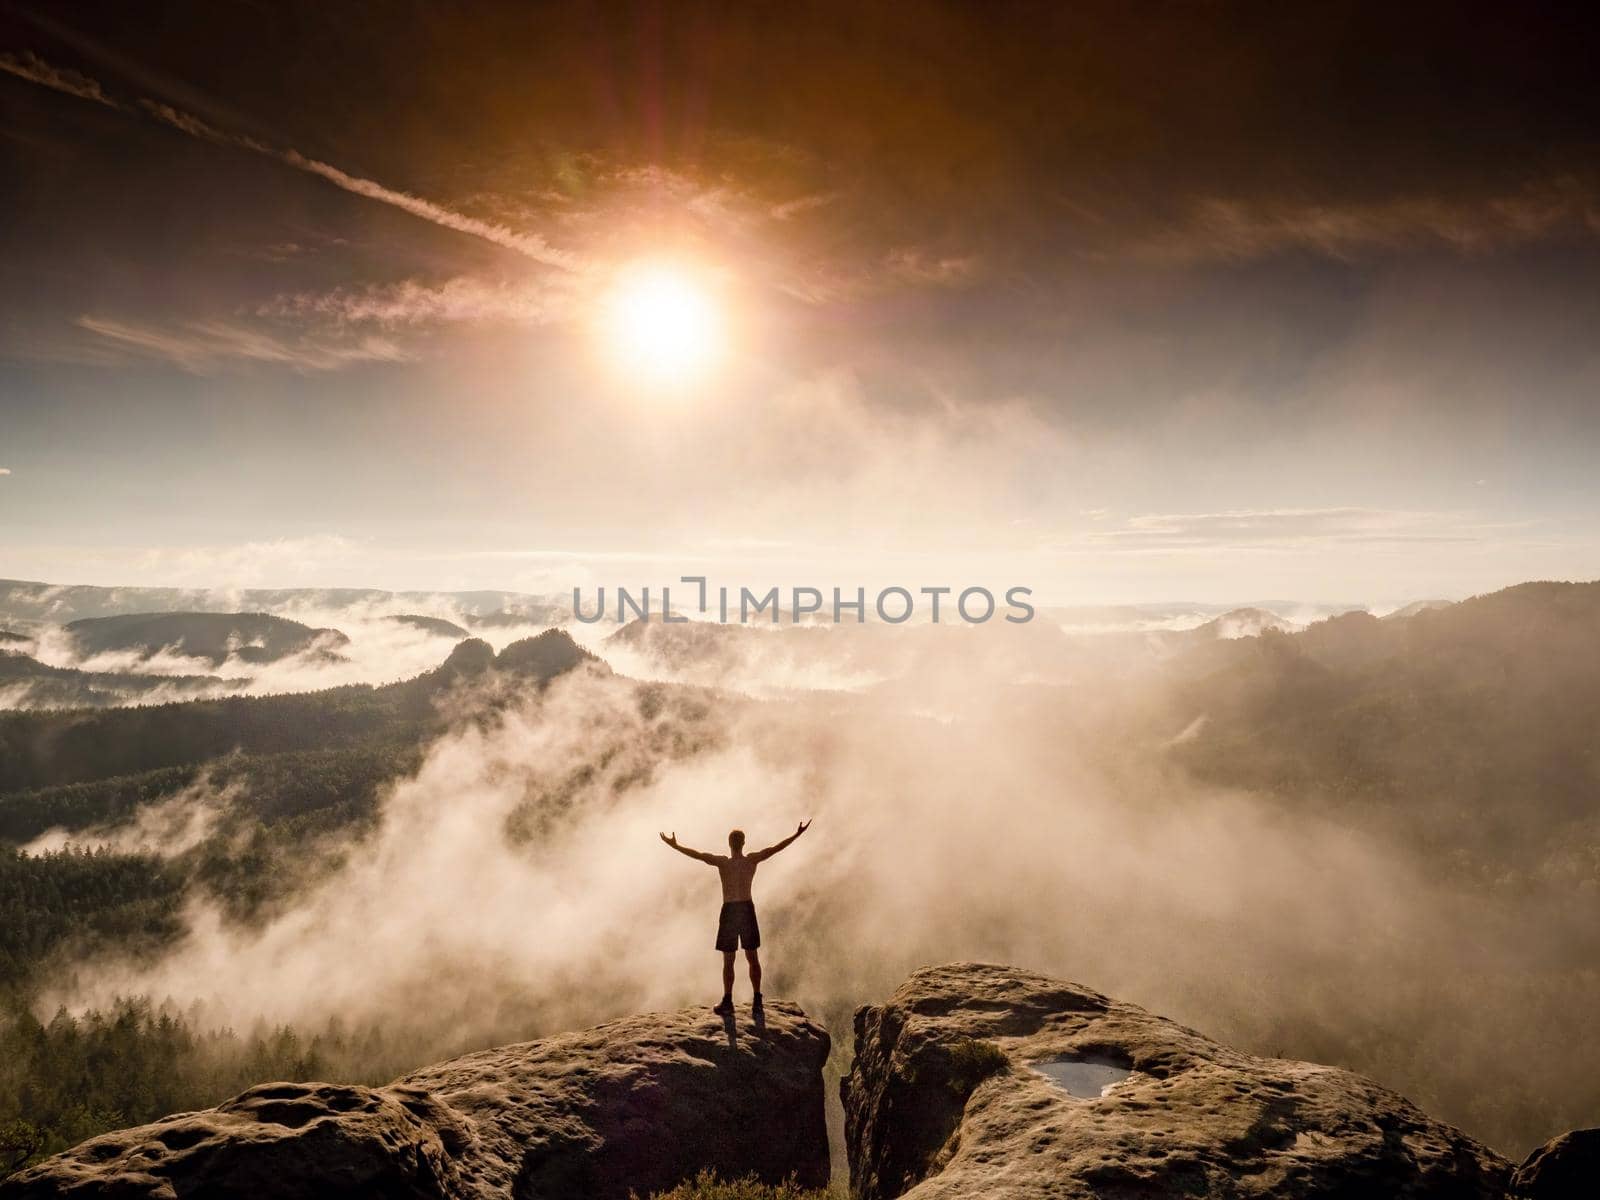 Young man on cliff edge celebrates reaching the top of the mountai by rdonar2